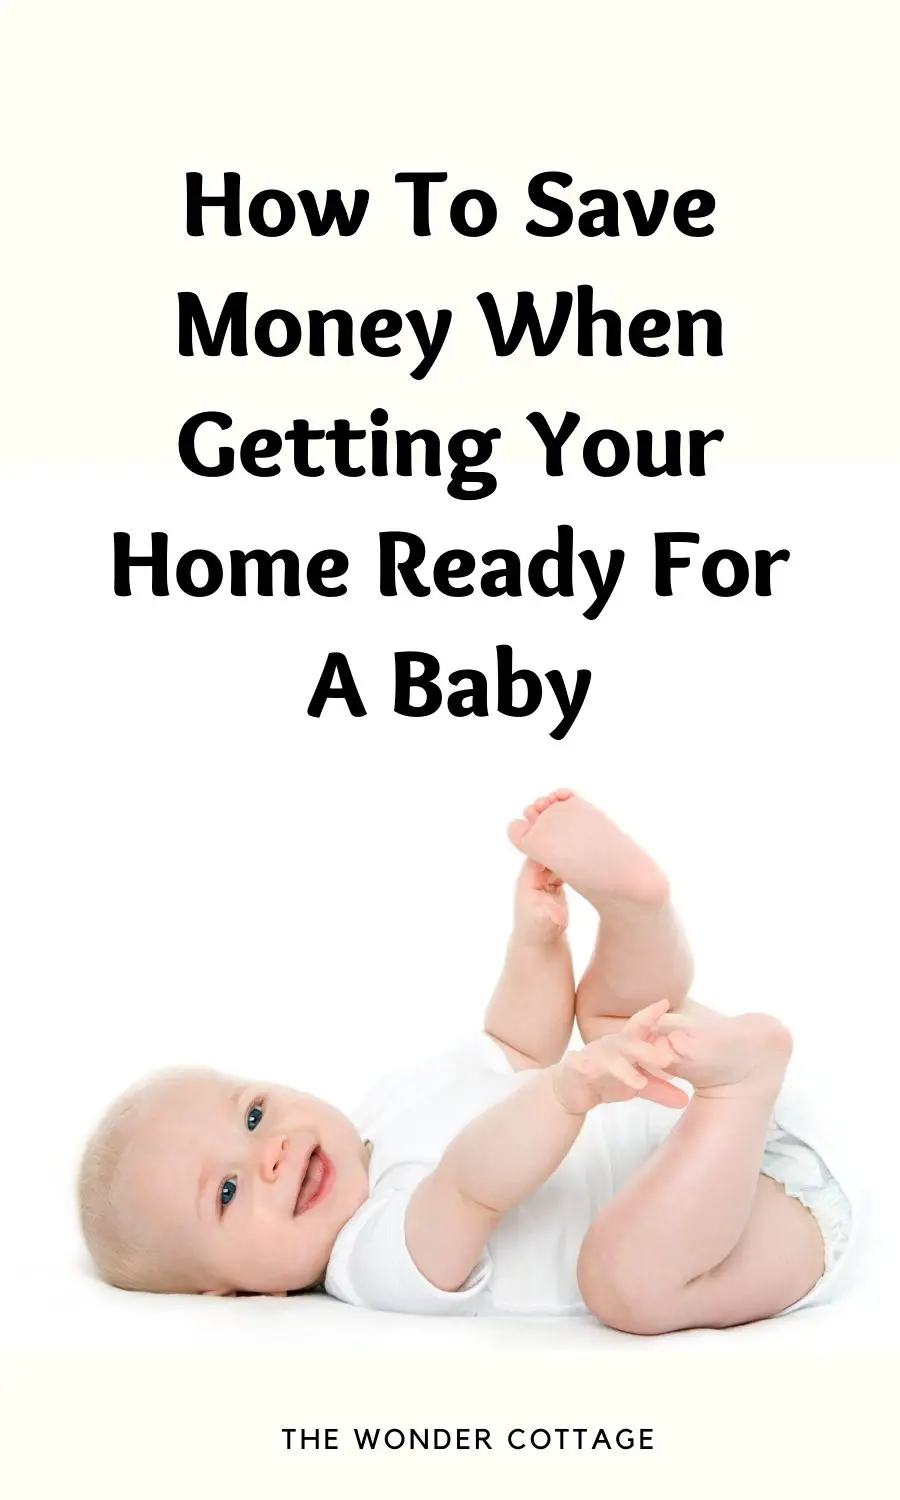 How To Save Money When Getting Your Home Ready For A Baby